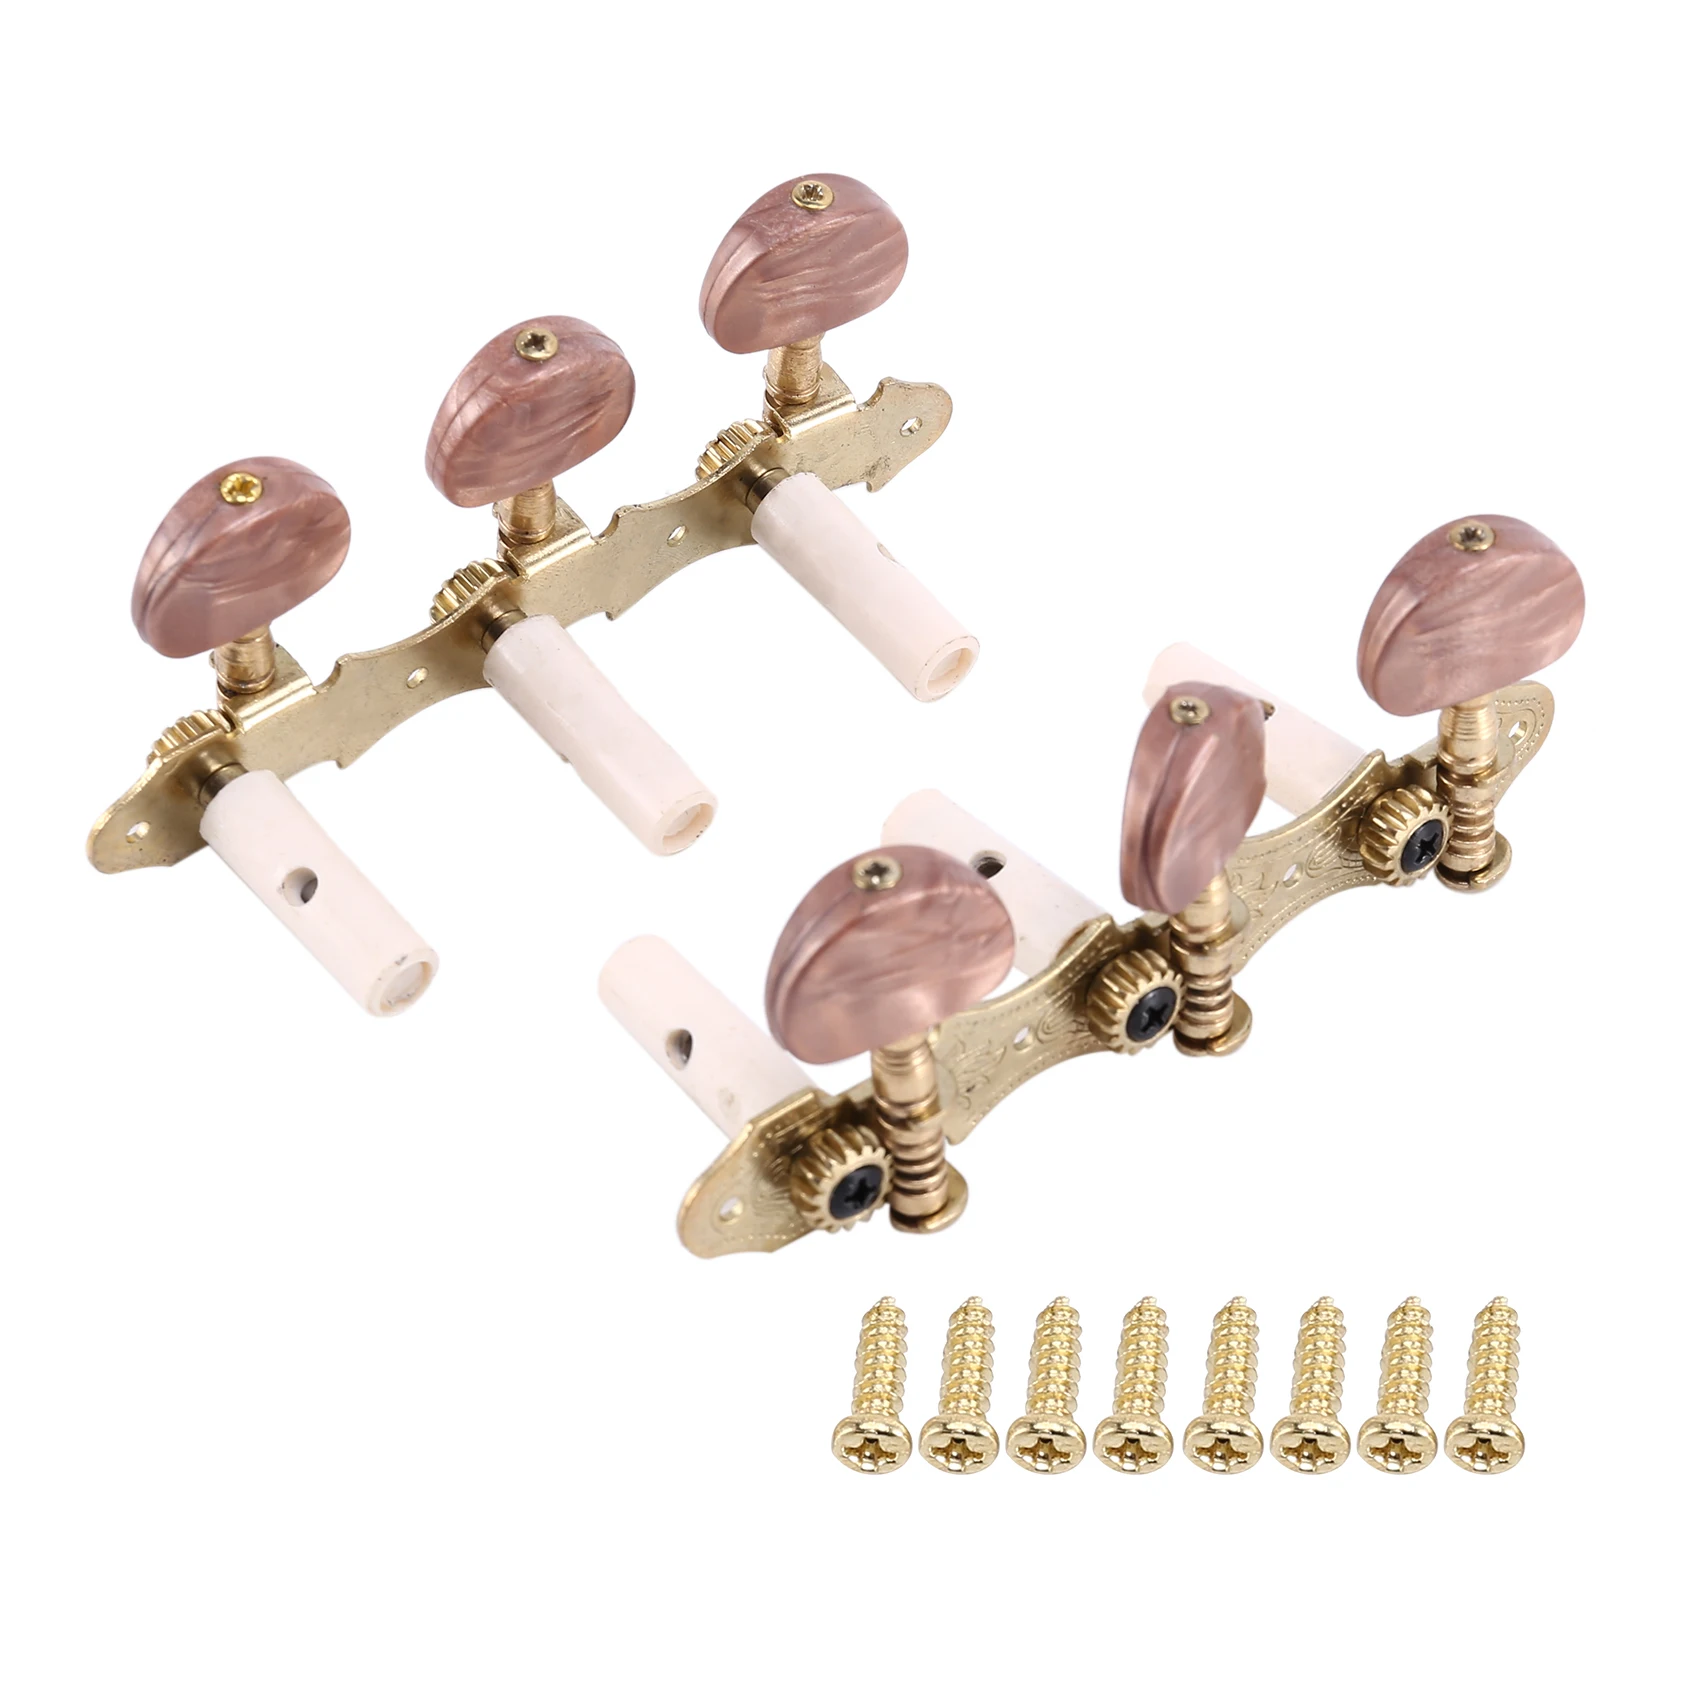 

Left Right Classical Guitar String Tuning Pegs Machine Heads Tuners Keys 3L3R Professional Guitar Accessories,Red-Brown